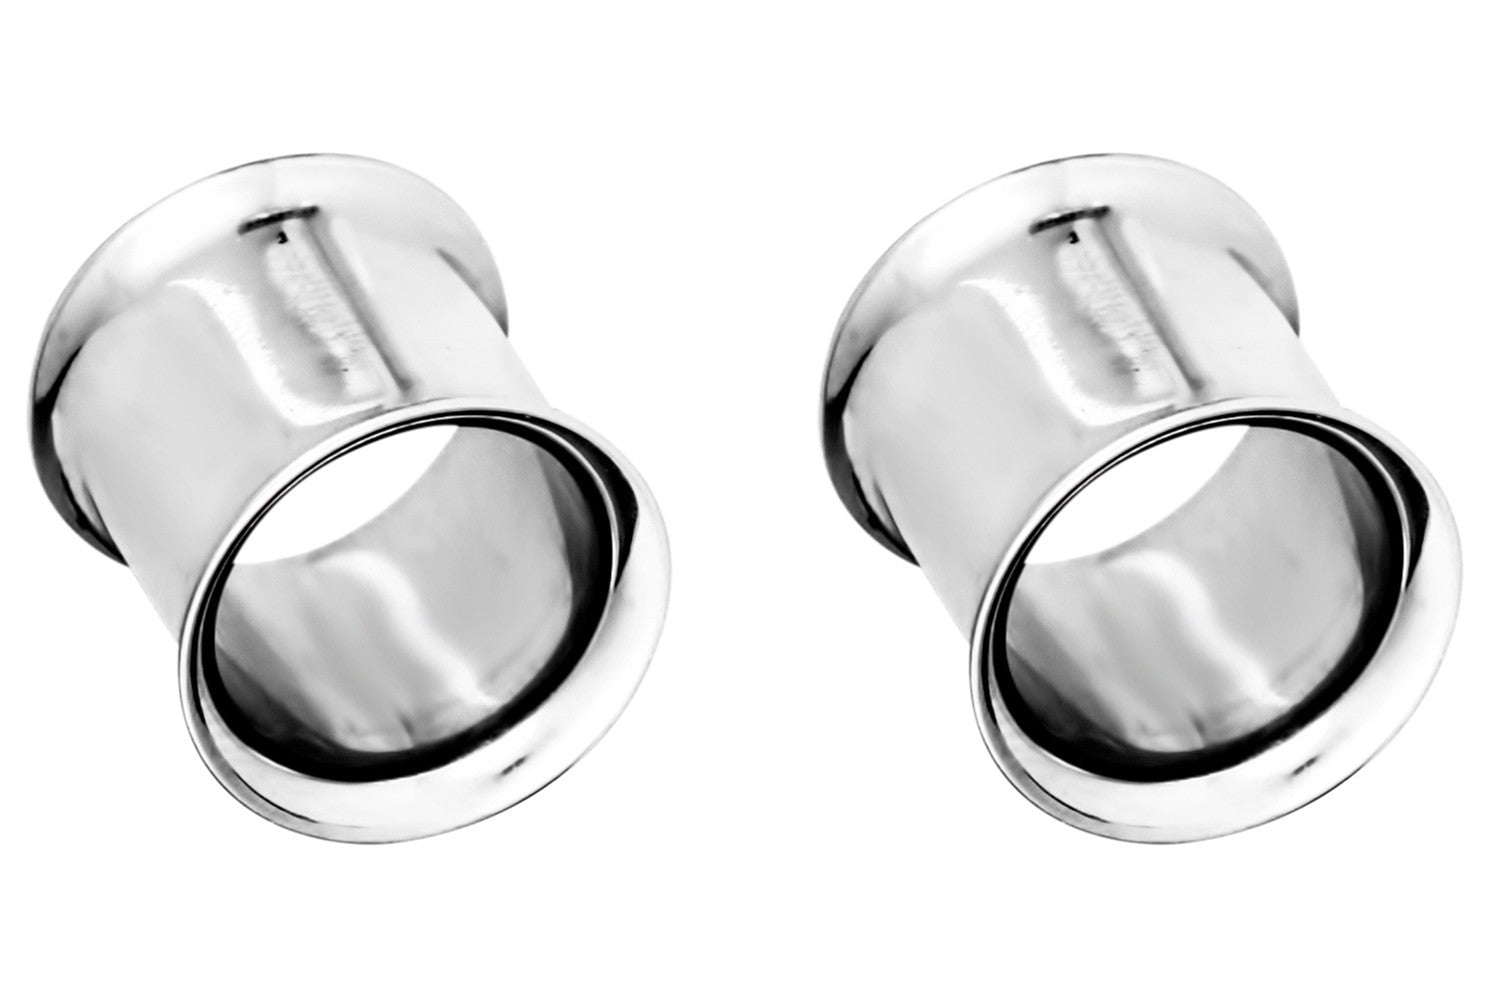 These tunnel plugs are made with implant grade 316L Surgical Steel. This hypoallergenic body jewelry is lead & nickel free.